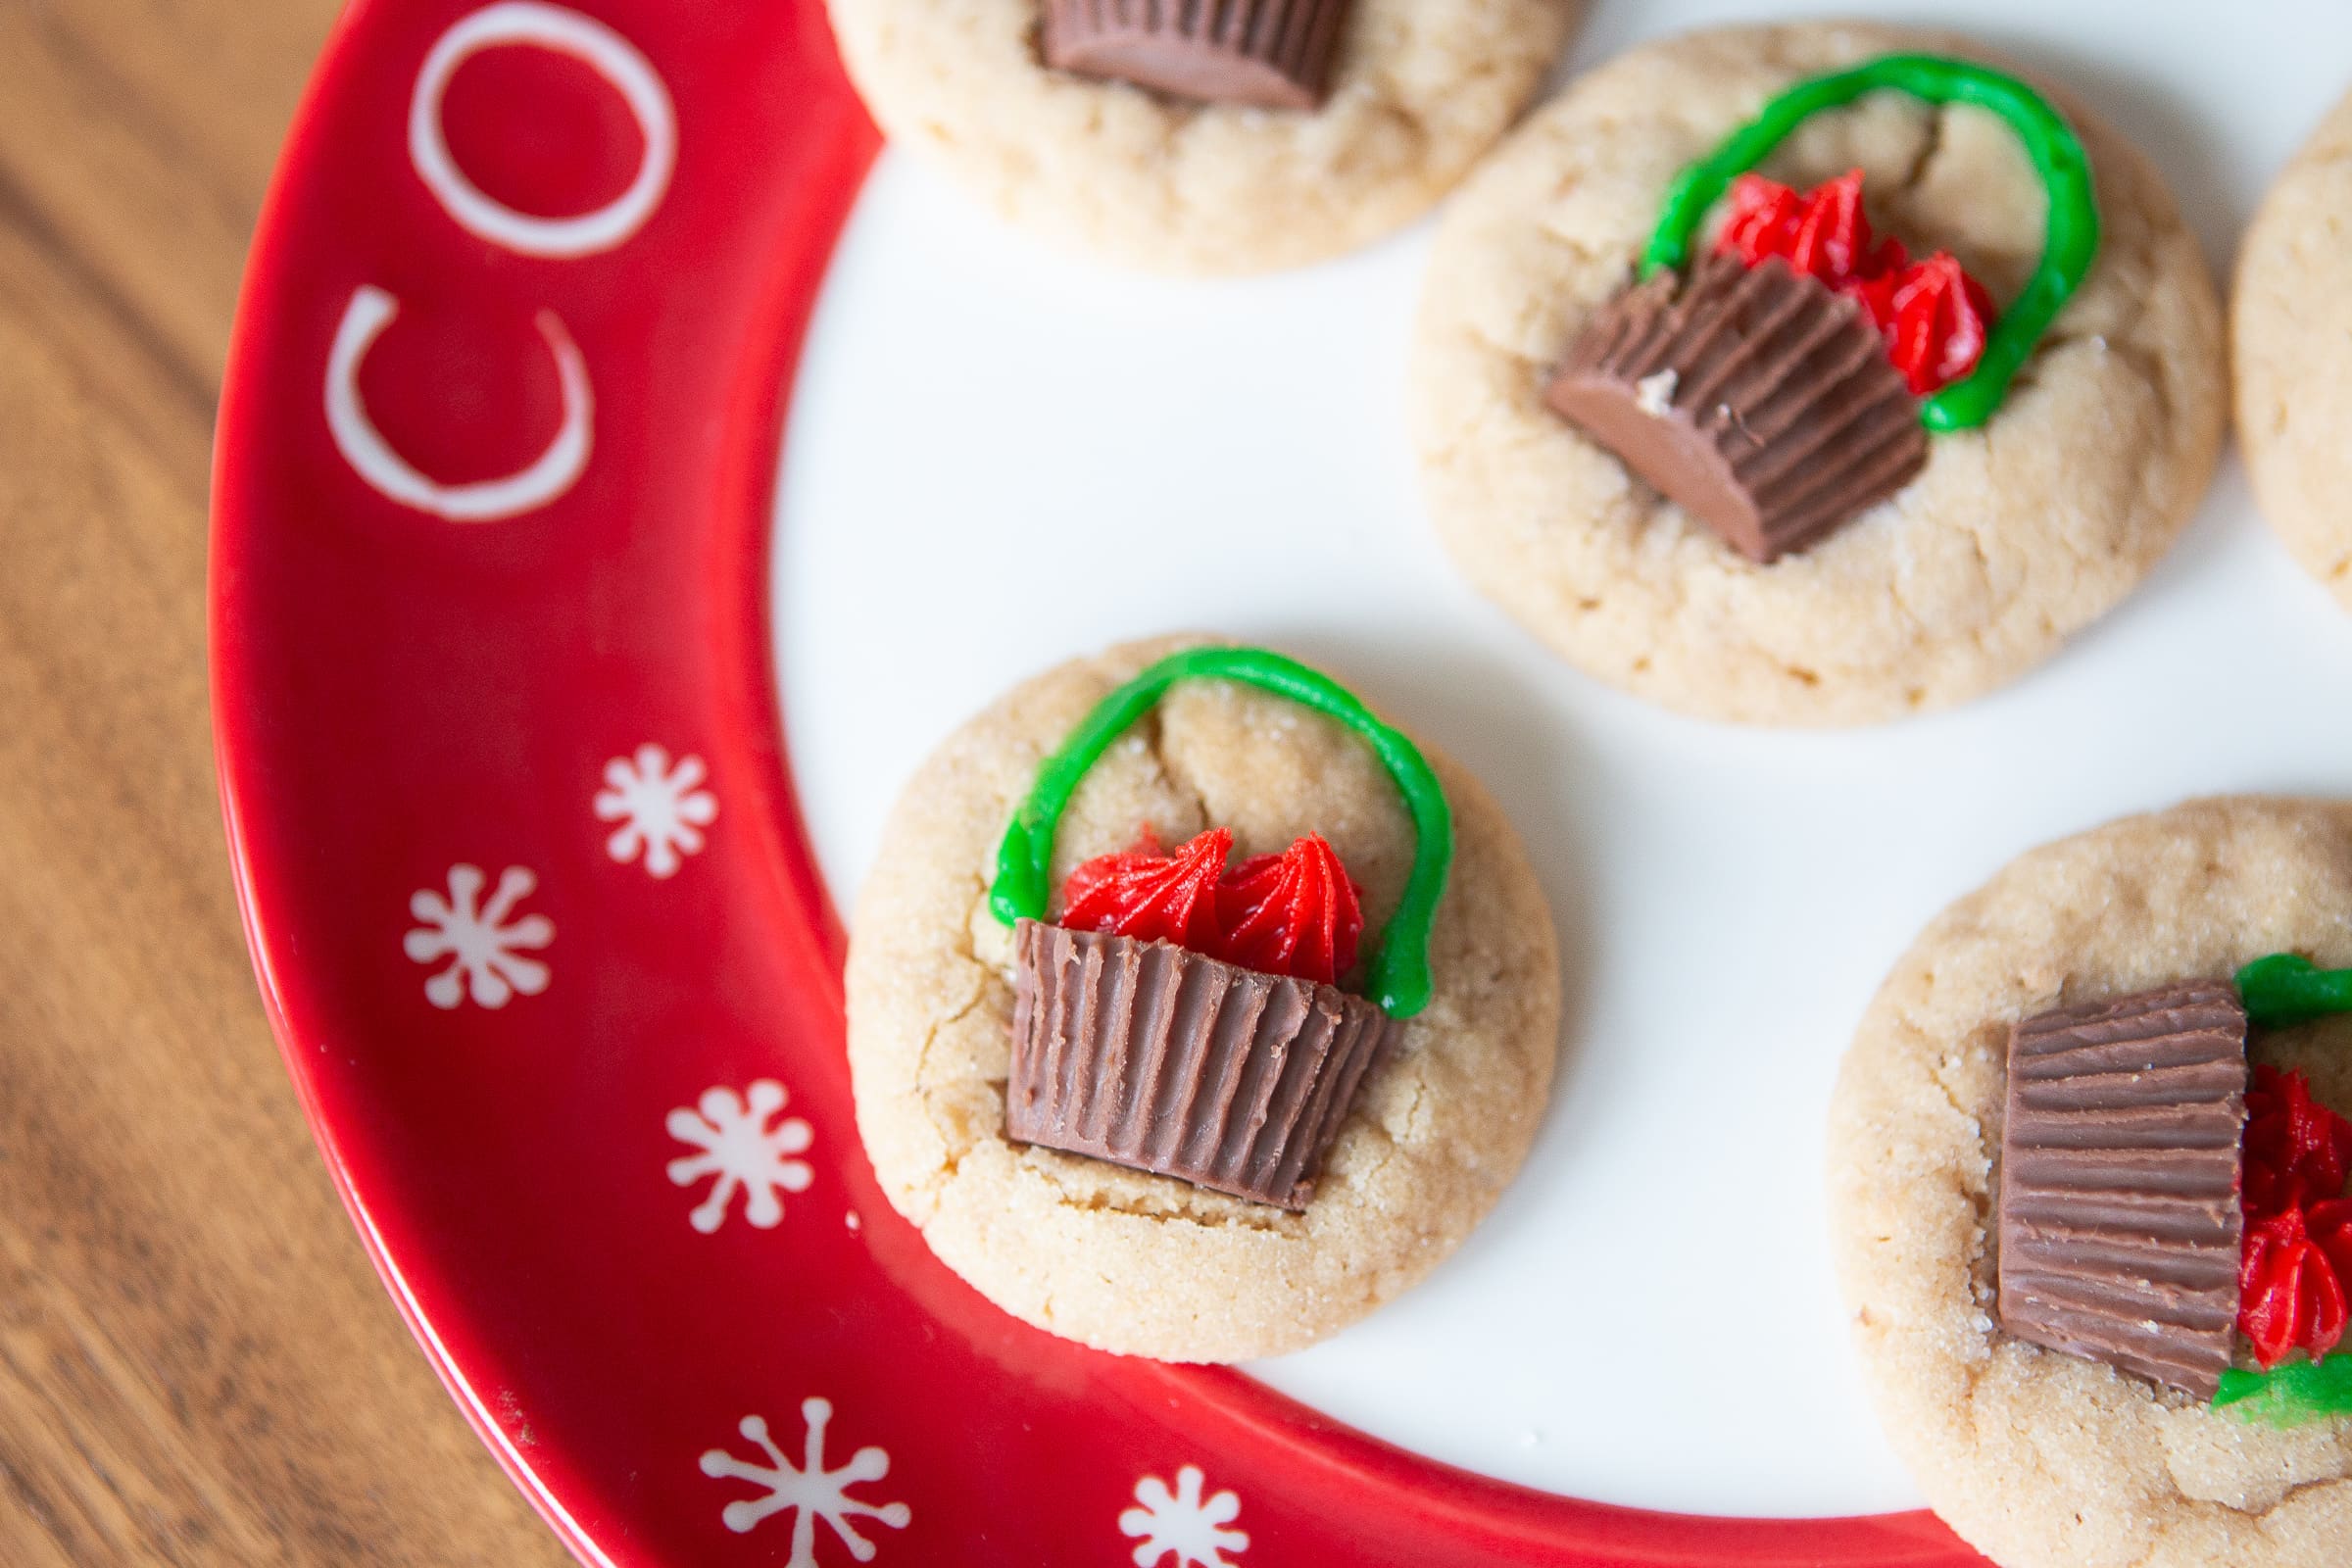 A yummy peanut butter Christmas cookie recipe